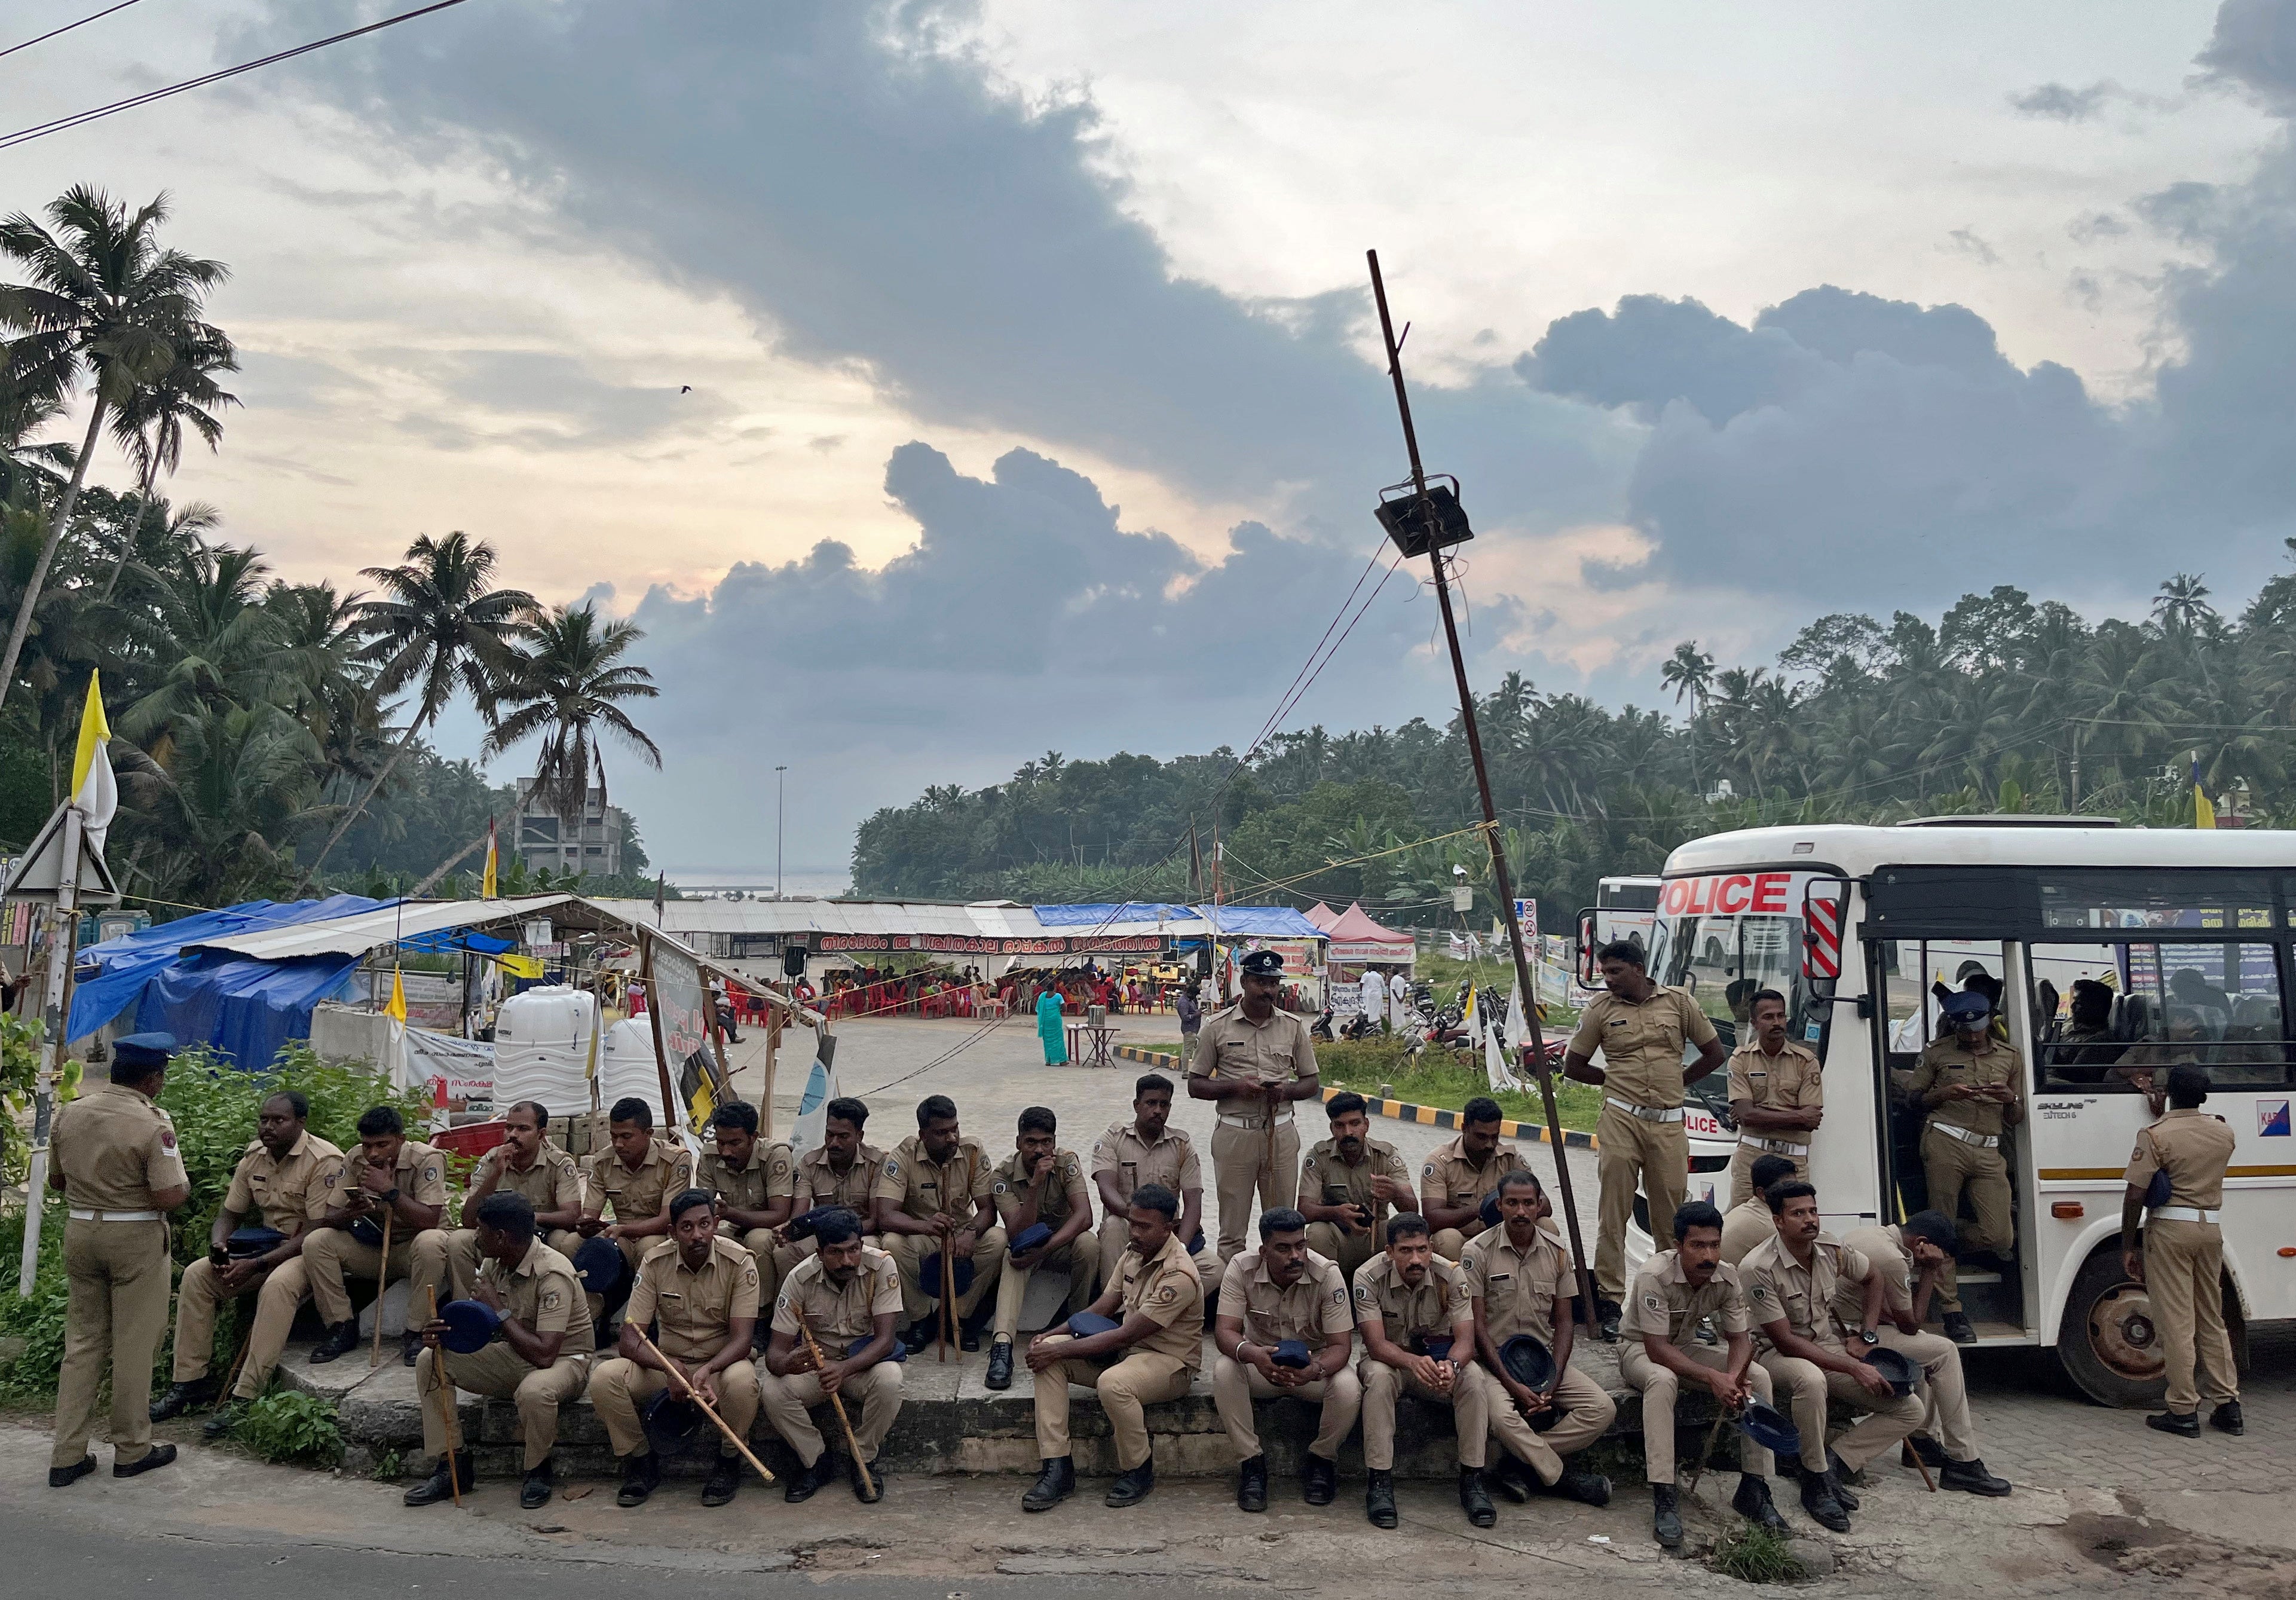 Police officers are deployed as fishermen protest near the entrance of the proposed Vizhinjam Port in Kerala